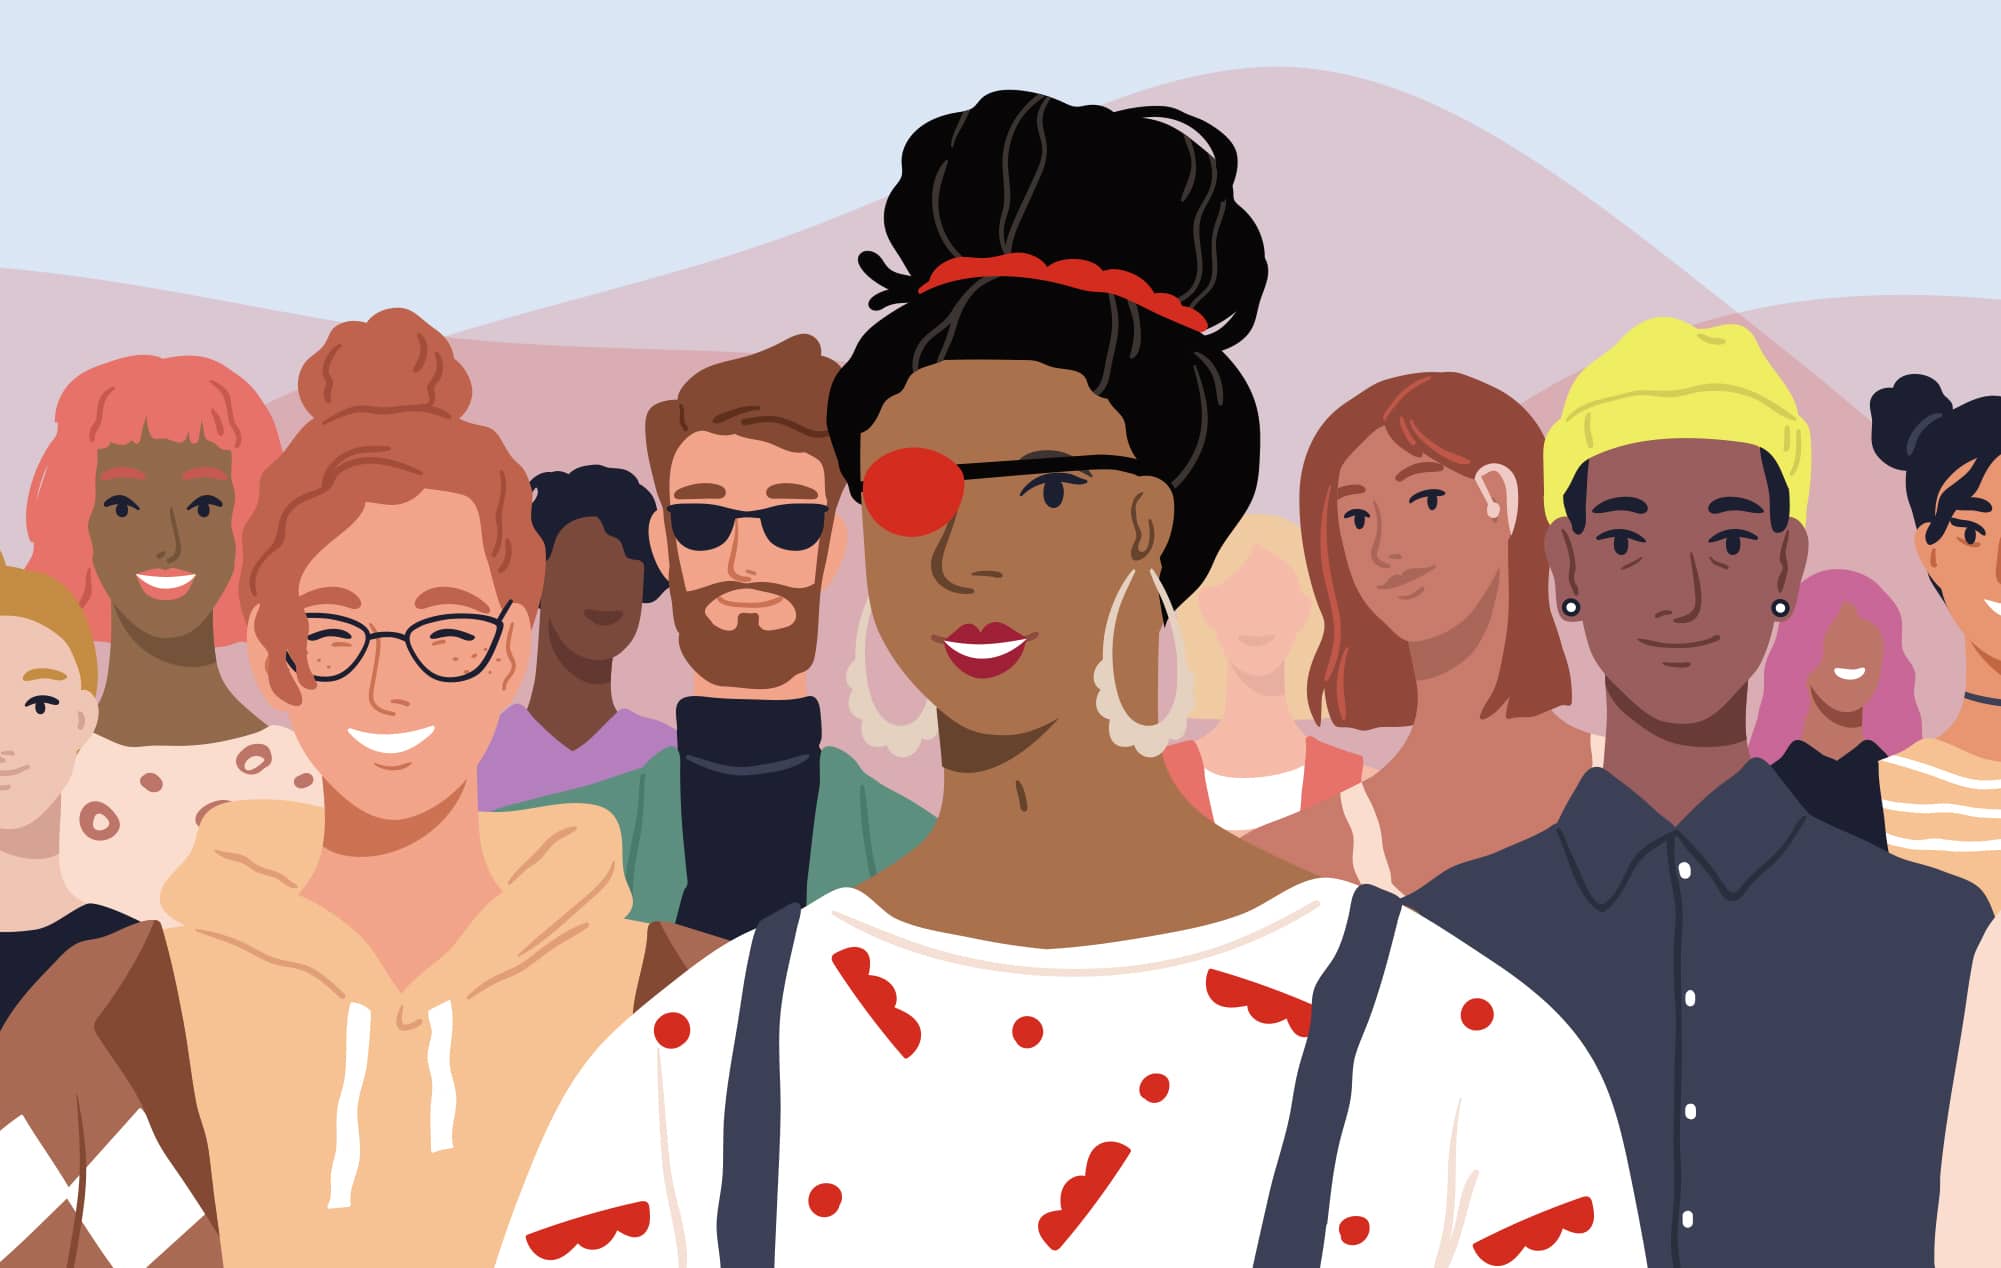 https://www.inclusionhub.com/hubfs/Blog/Illustration%20of%20a%20group%20of%20people%20standing%20together%3B%20the%20woman%20in%20the%20center%20has%20her%20hair%20up%20and%20wears%20a%20red%20headband%2C%20matching%20her%20red%20eyepatch.jpg